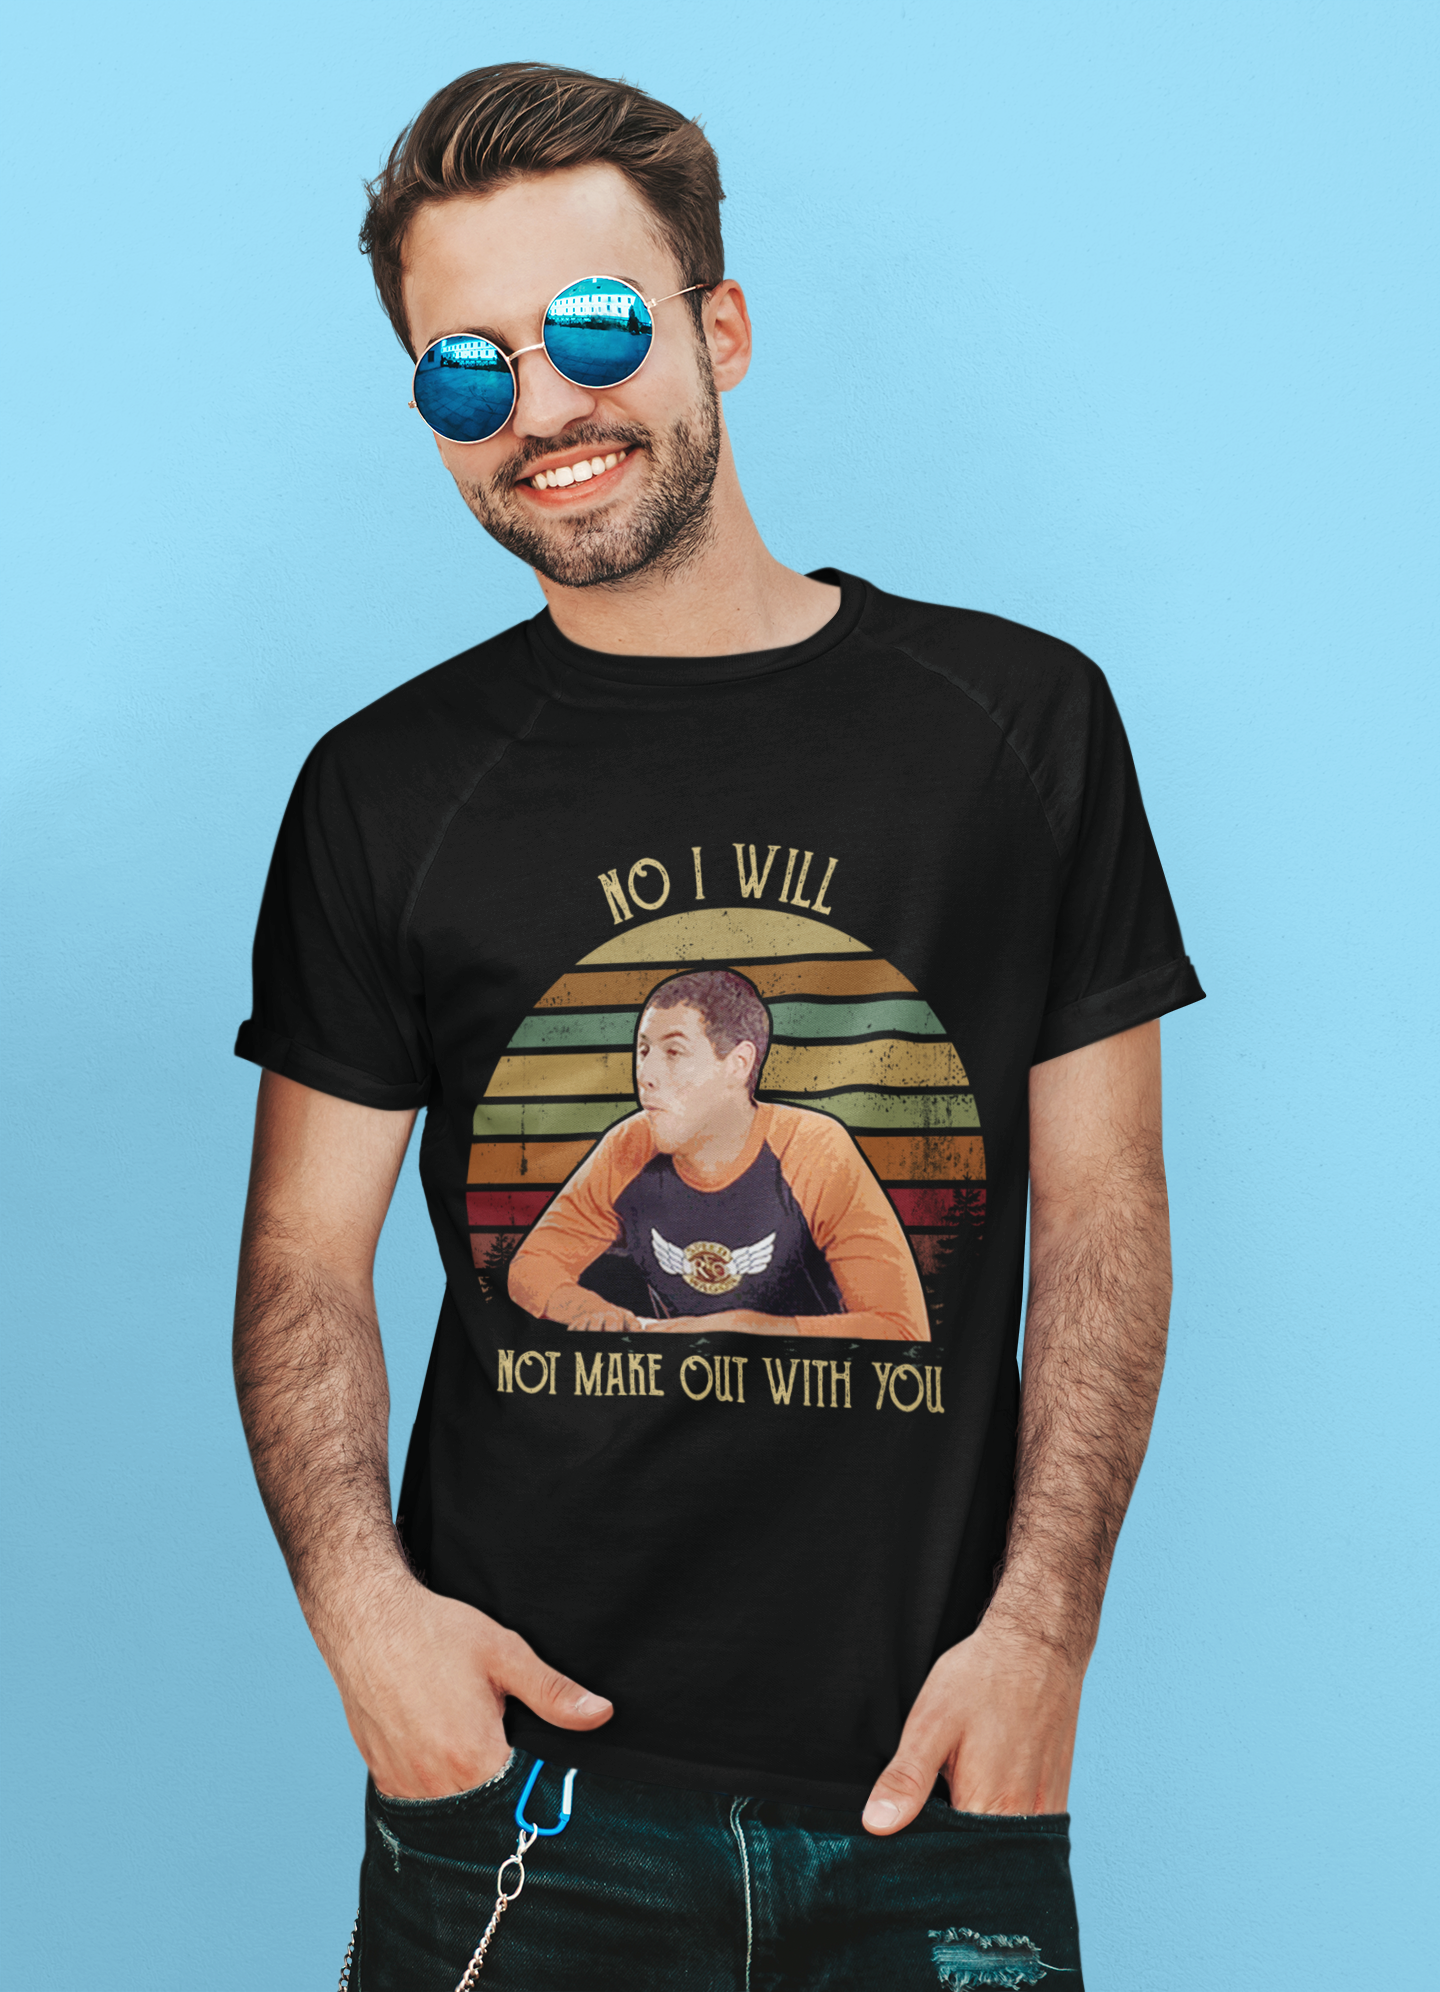 Billy Madison Vintage T Shirt, No I Will Not Make Out With You T Shirt, Billy Madison Tshirt